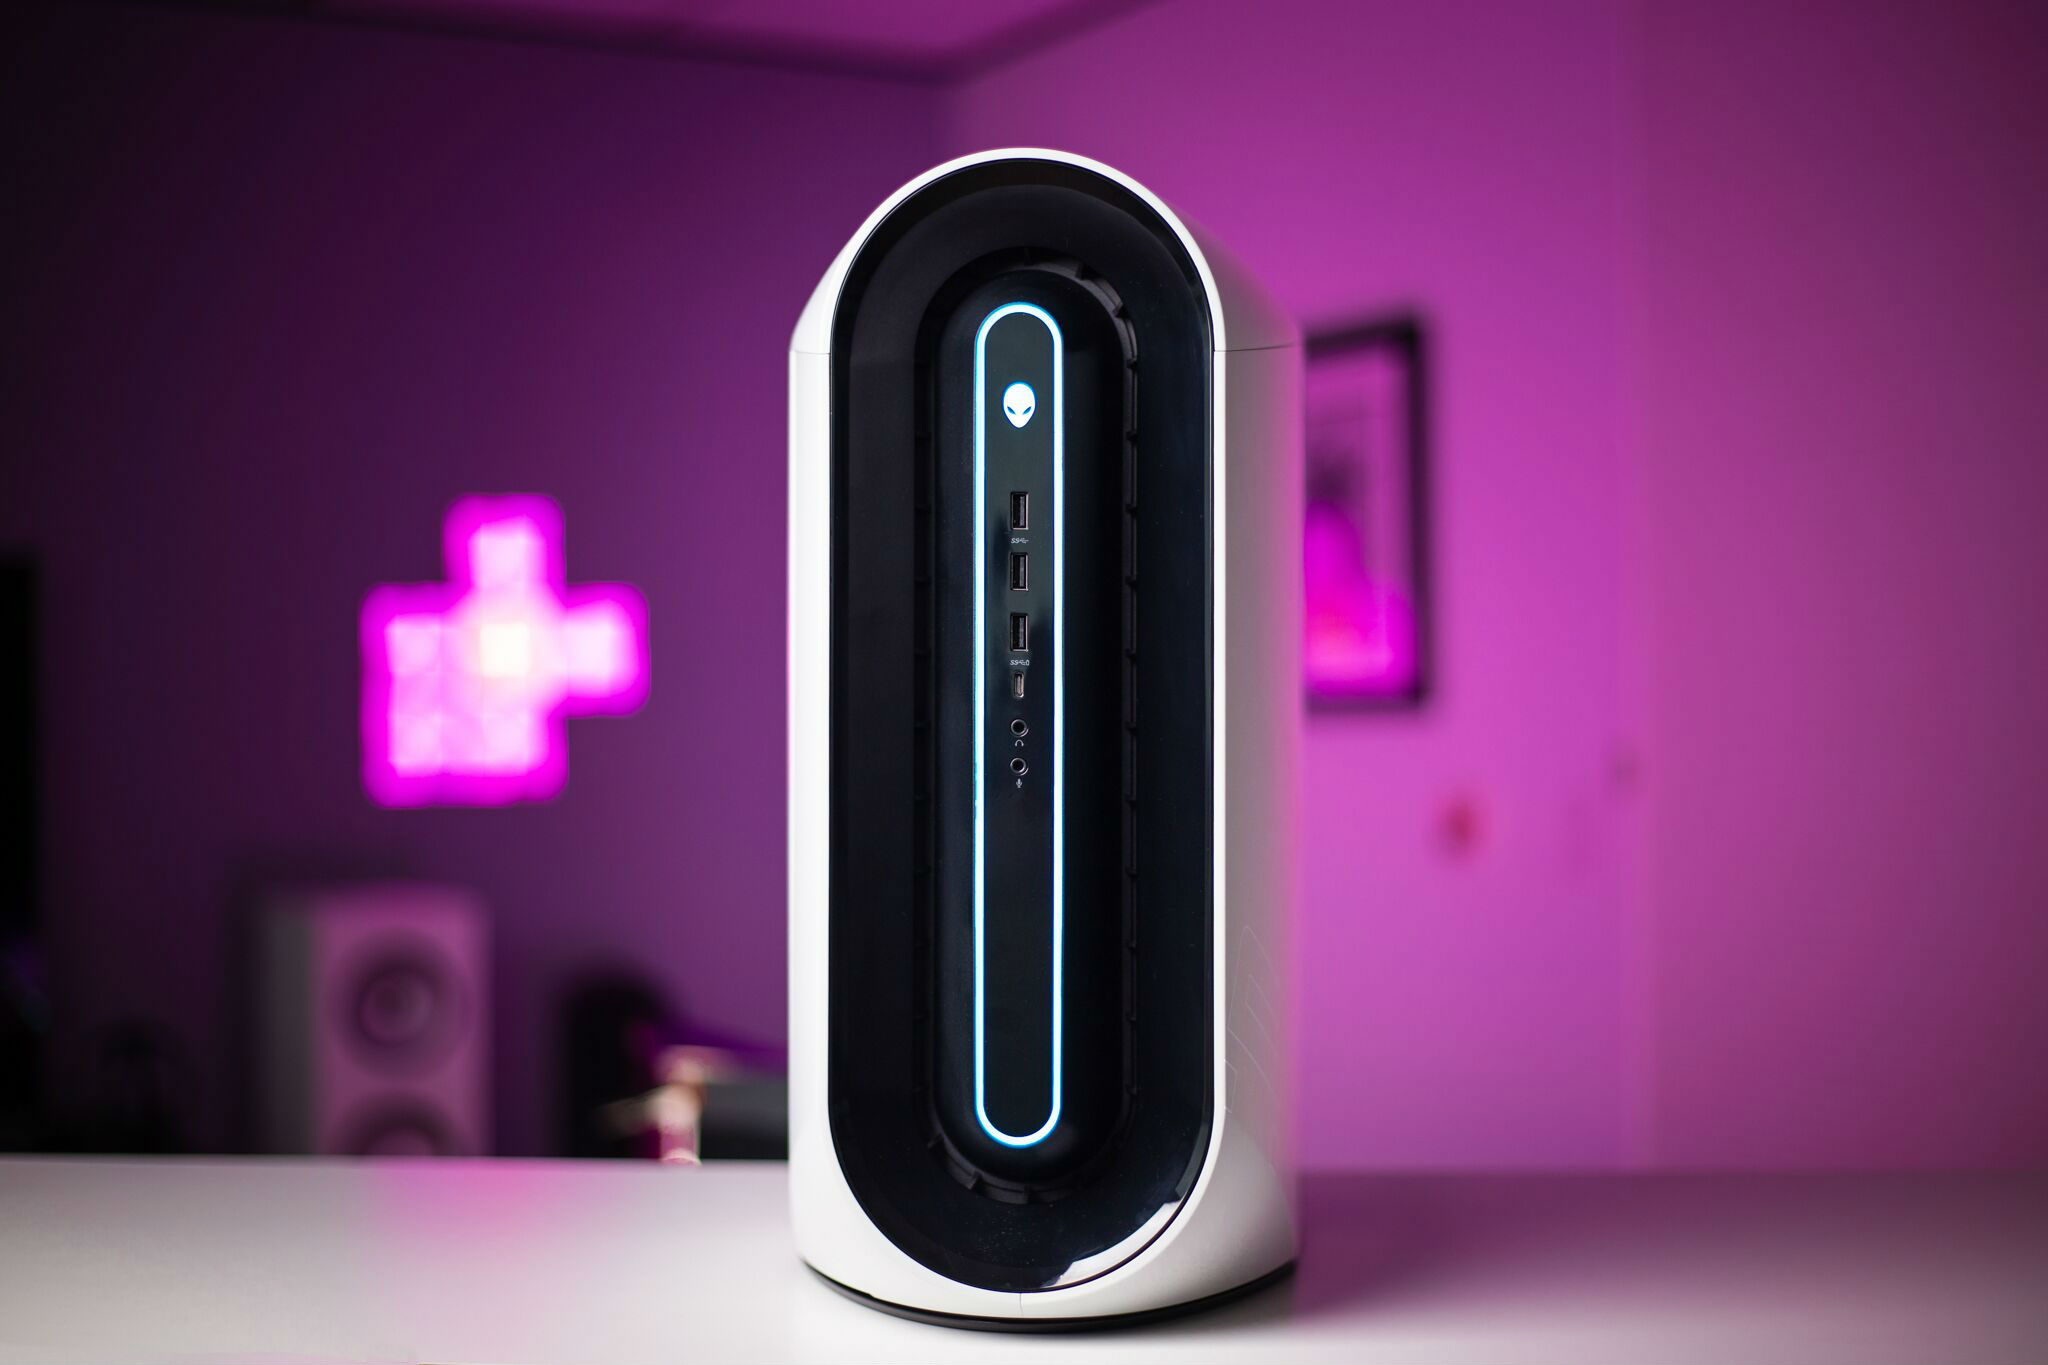 Memorial Day Deal: Save 0 on this Alienware Gaming PC